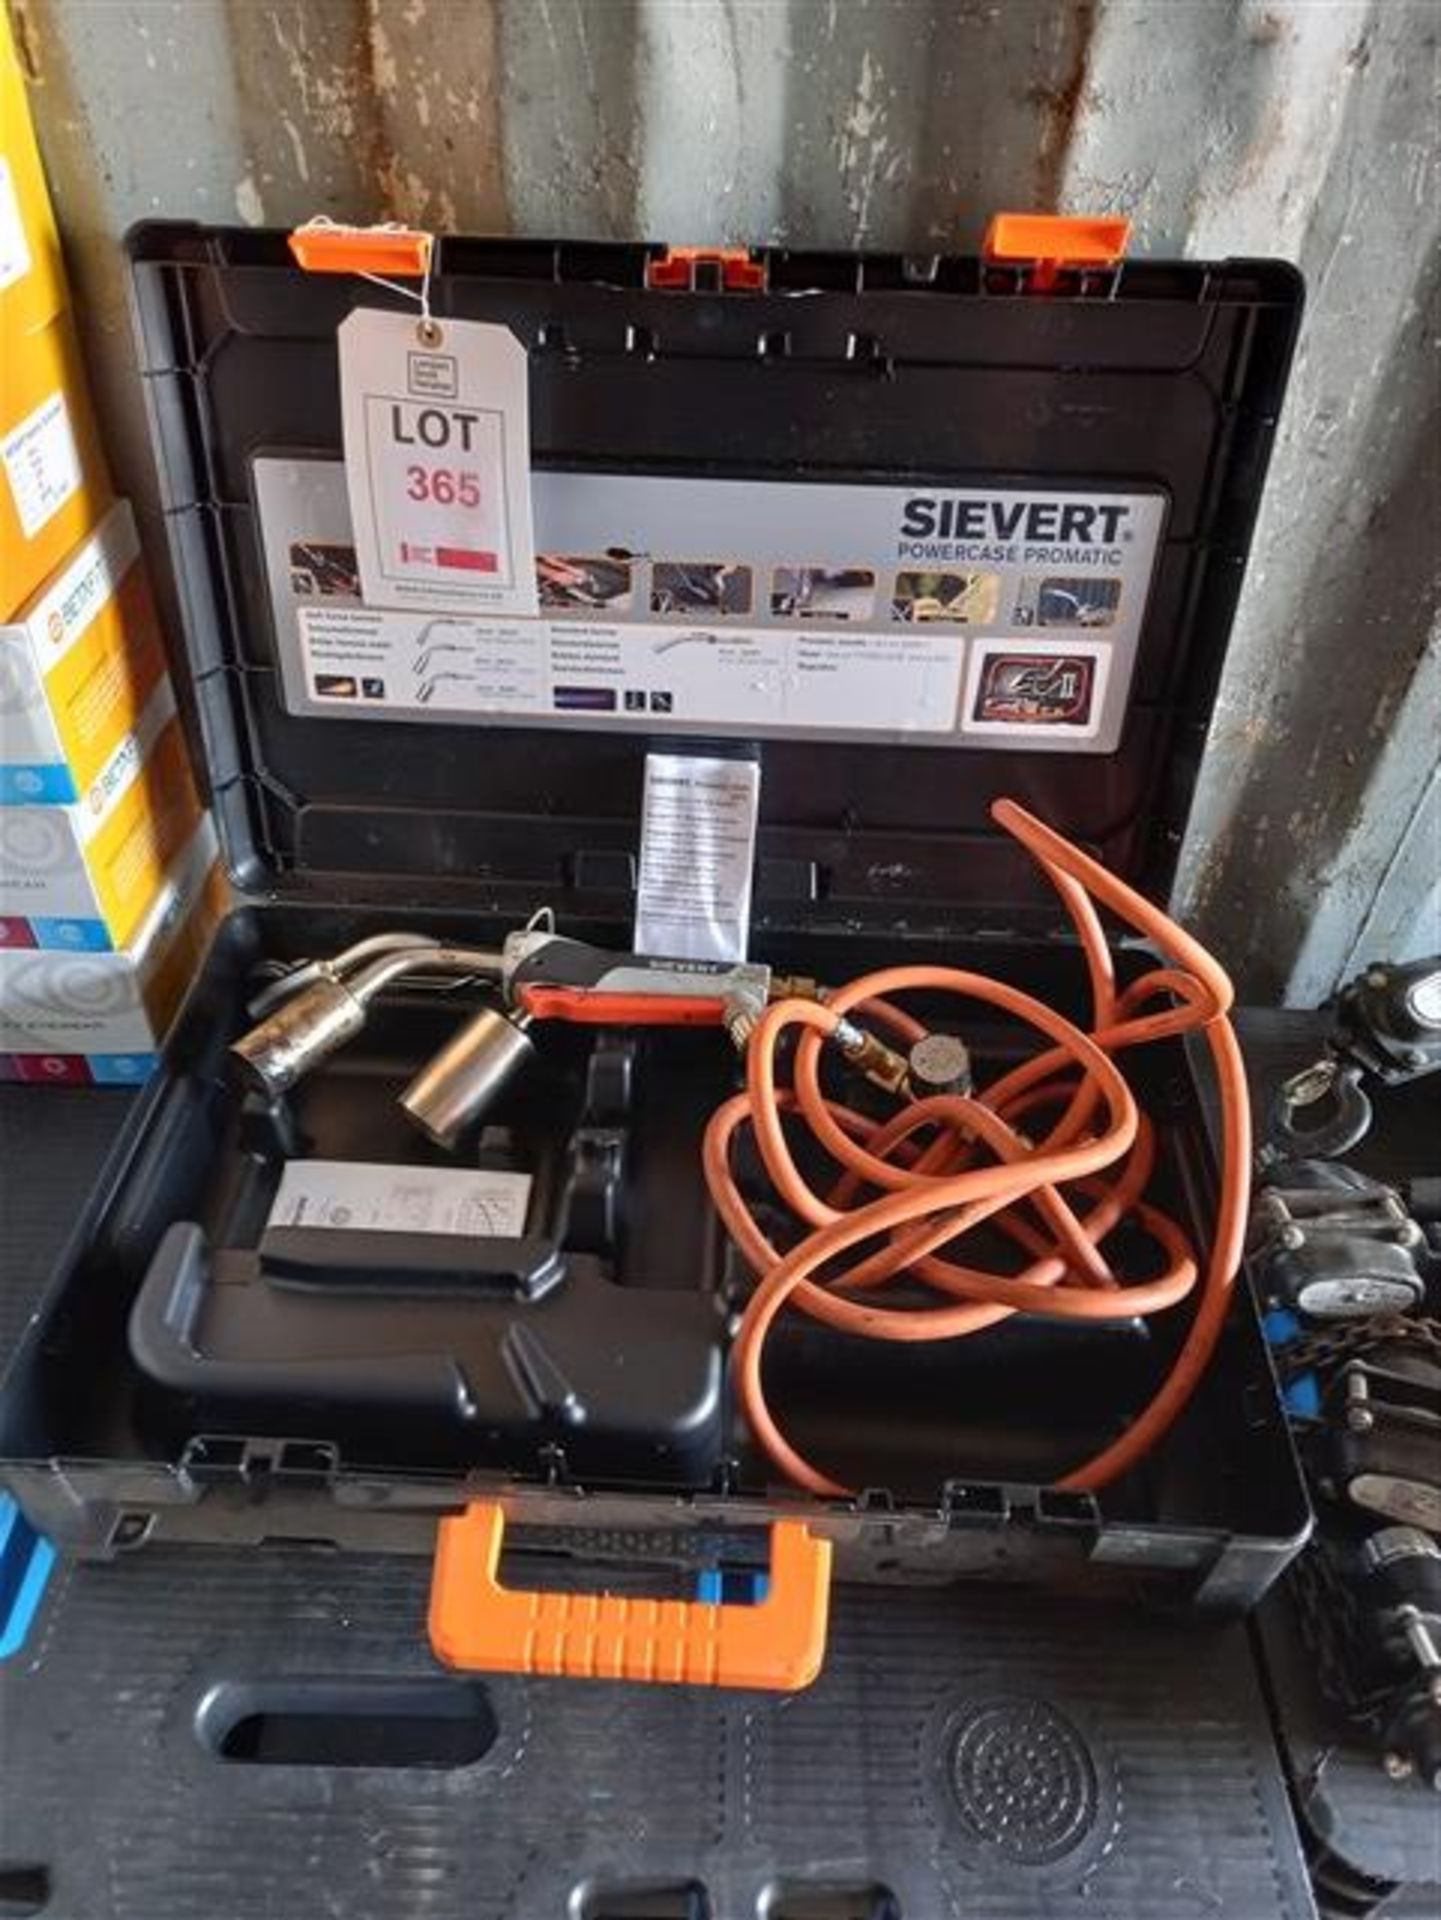 Sievert Promatic 3366 + 3370 promatic heat shrinking kit (incomplete) *This lot is located at